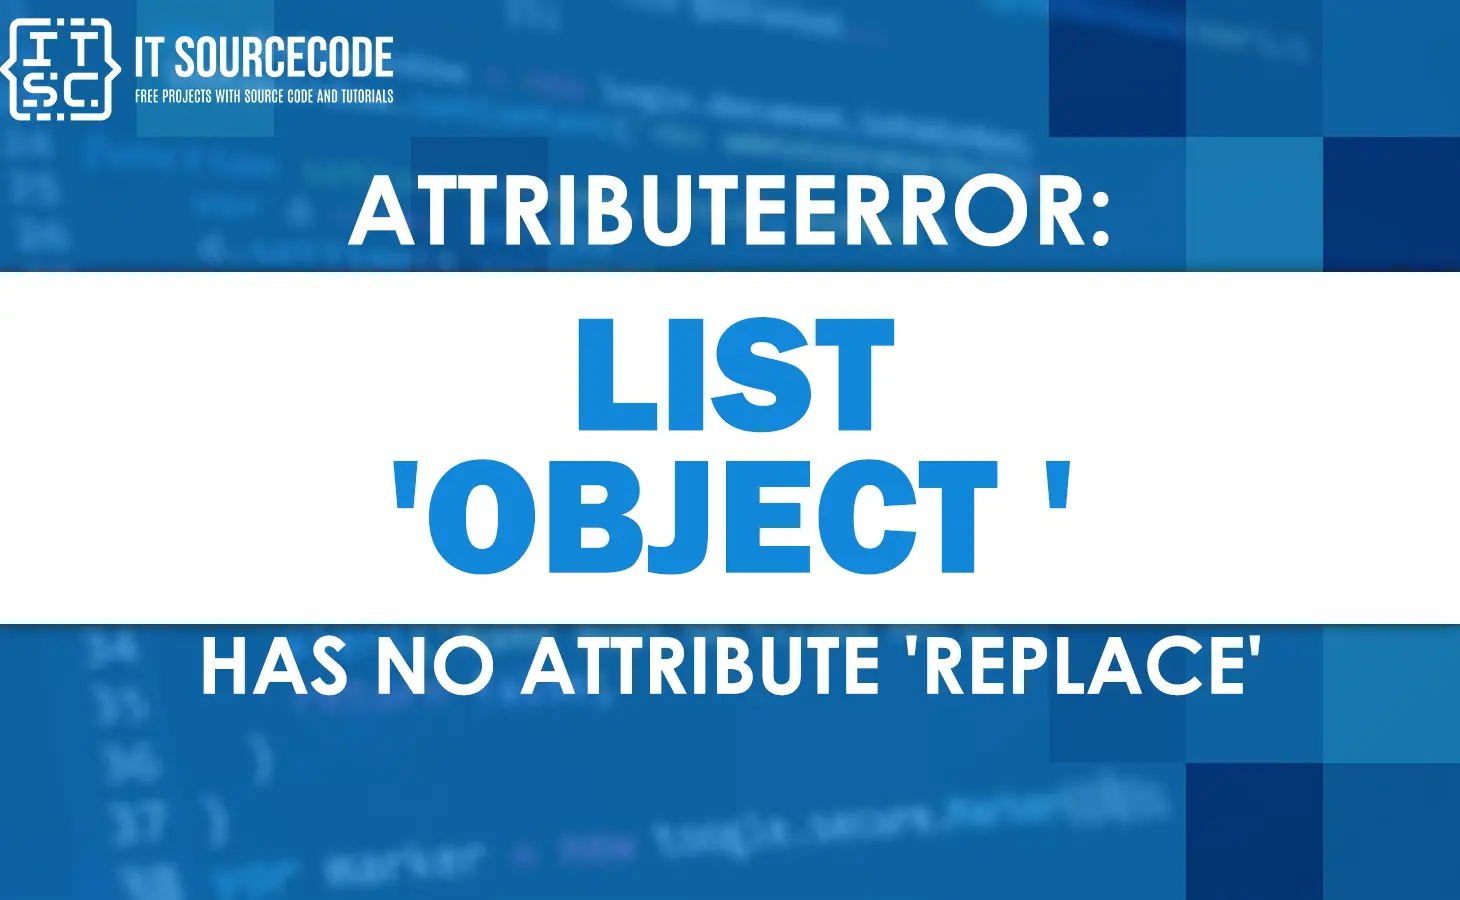 Attributeerror 'list' object has no attribute 'replace'